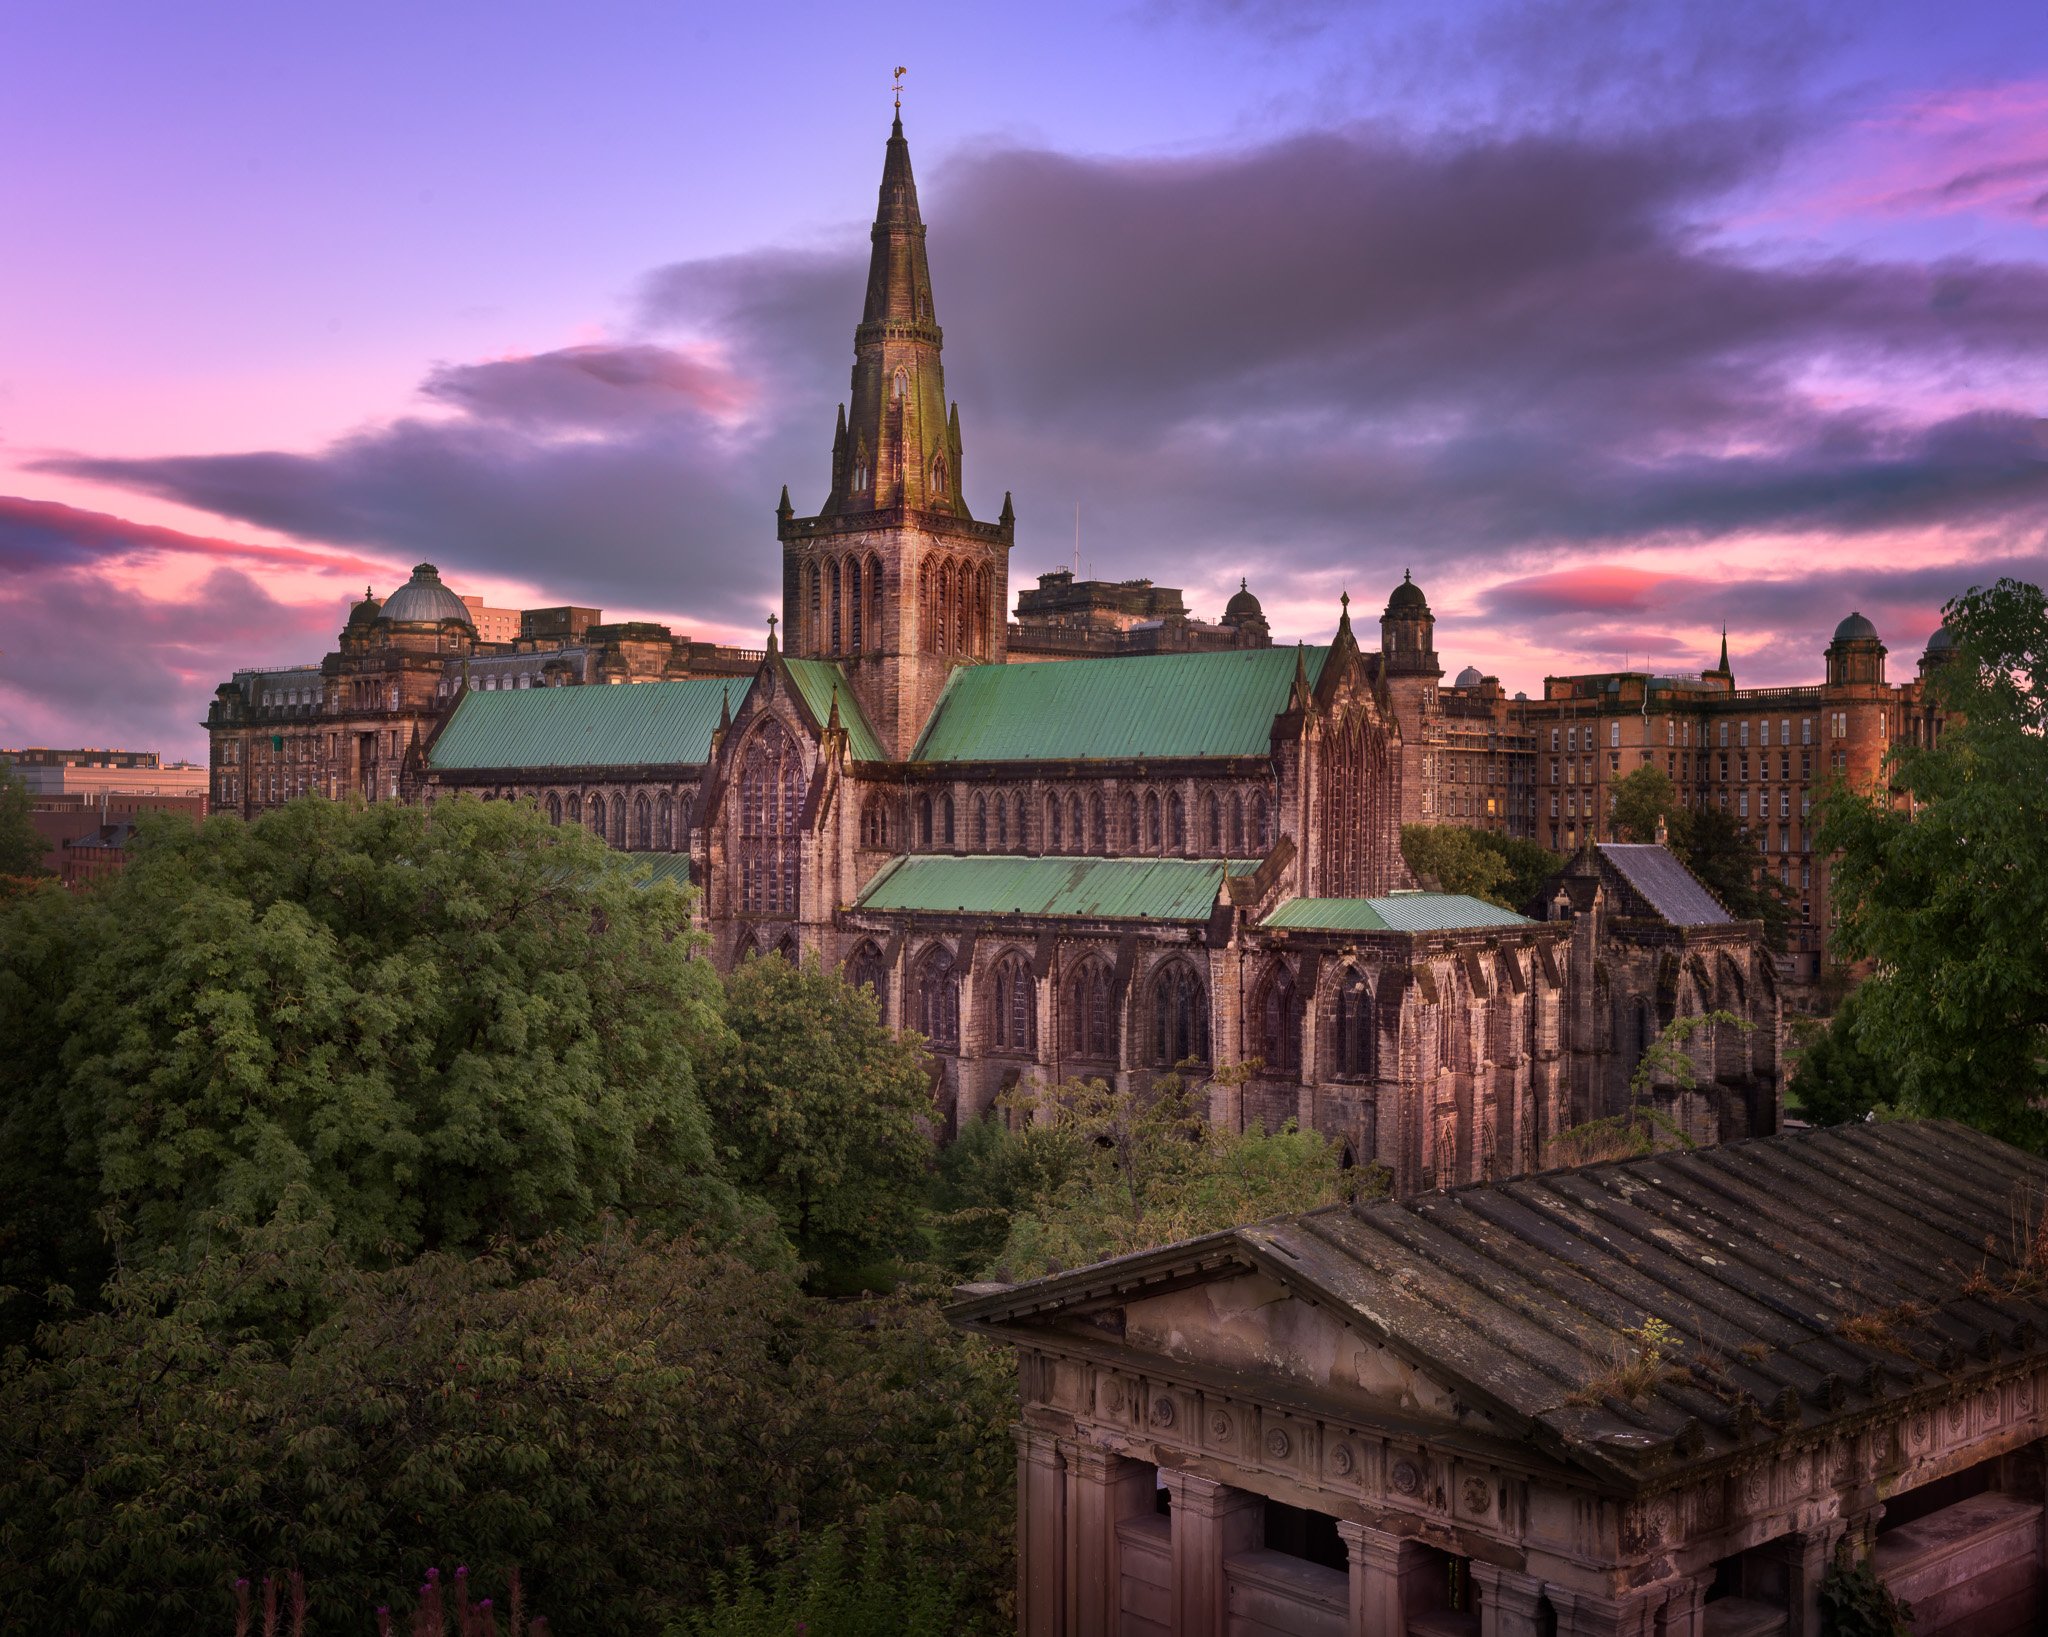 ancient, architecture, belfry, blue, britain, brown, building, cathedral, cemetery, church, churchyard, city, cityscape, construction, dawn, dom, europe, european, faith, glasgow, gothic, grave, graveyard, great, history, iconic, kingdom, landmark, mediev, Andrey Omelyanchuk